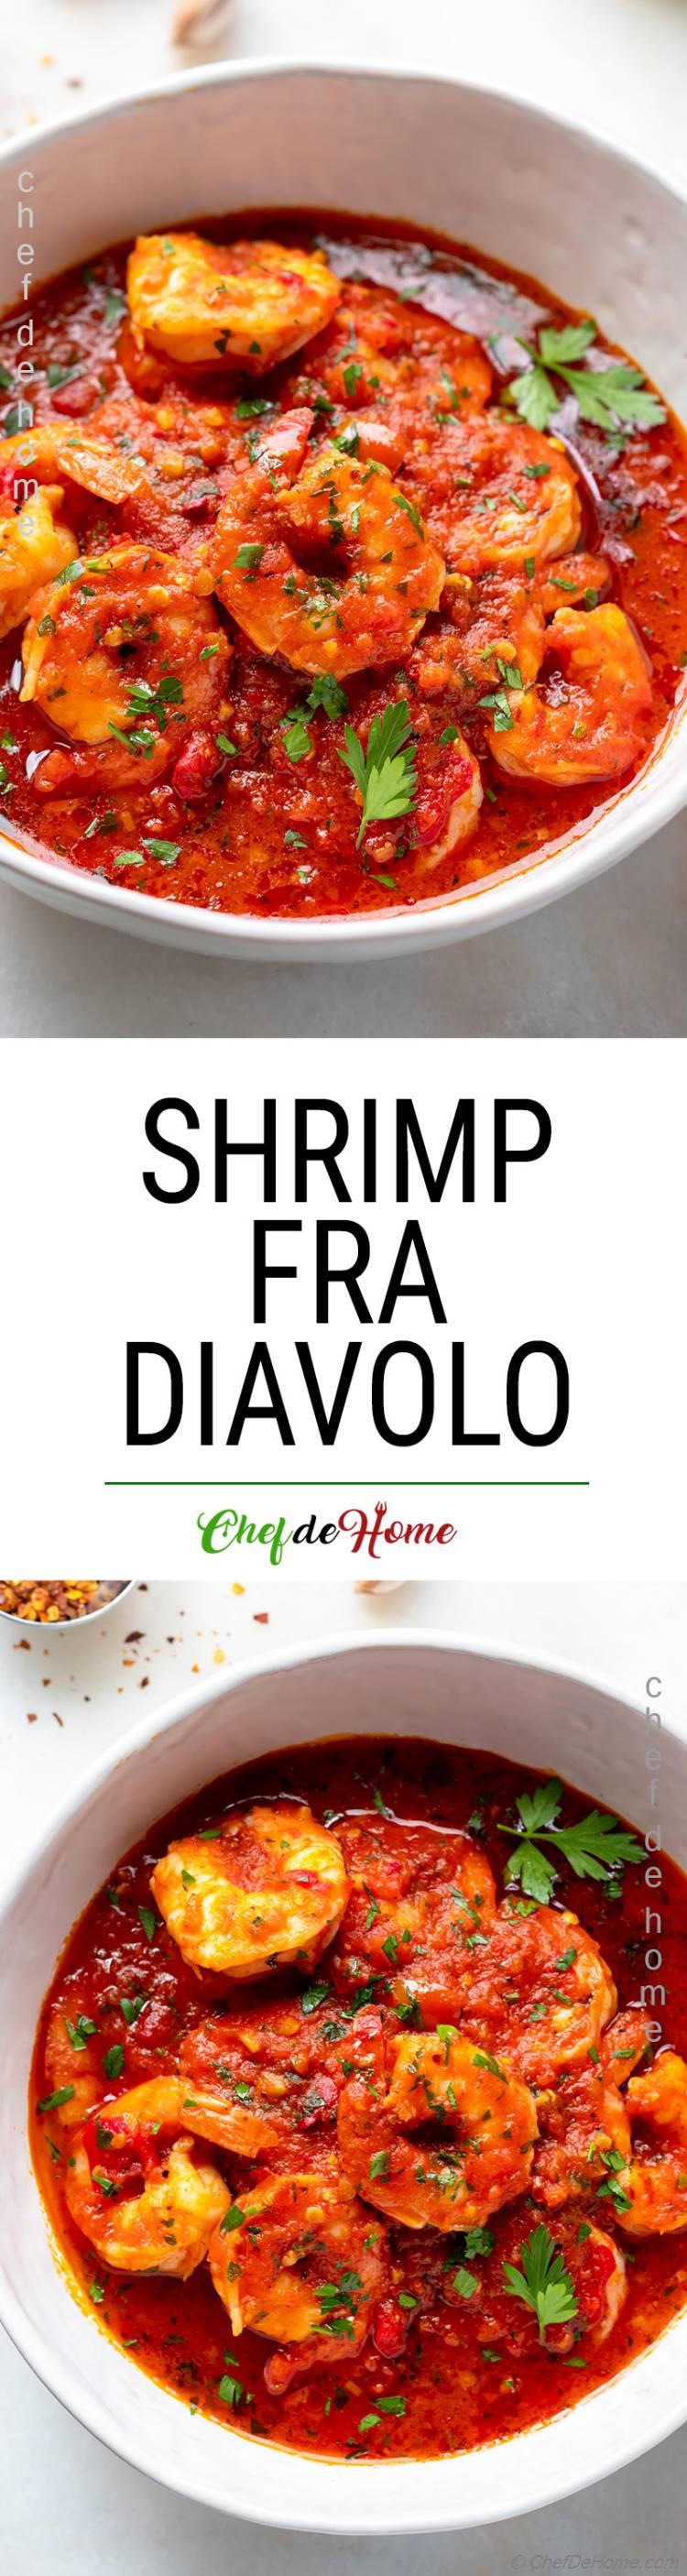 Shrimp Fa Diavolo Sauce picture long with text